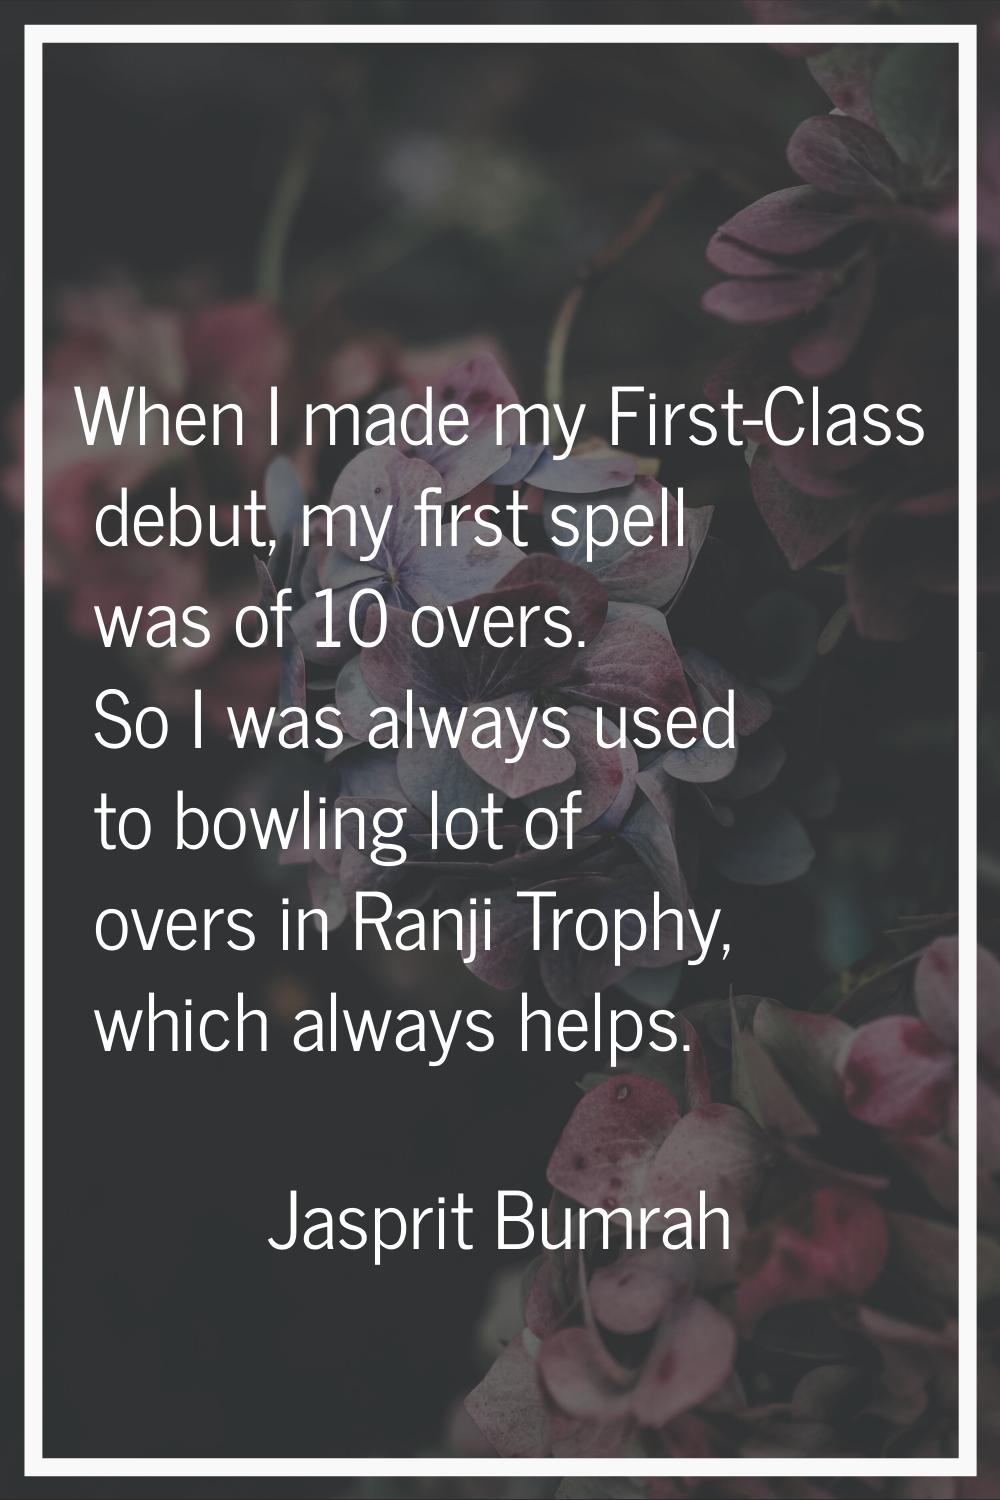 When I made my First-Class debut, my first spell was of 10 overs. So I was always used to bowling l